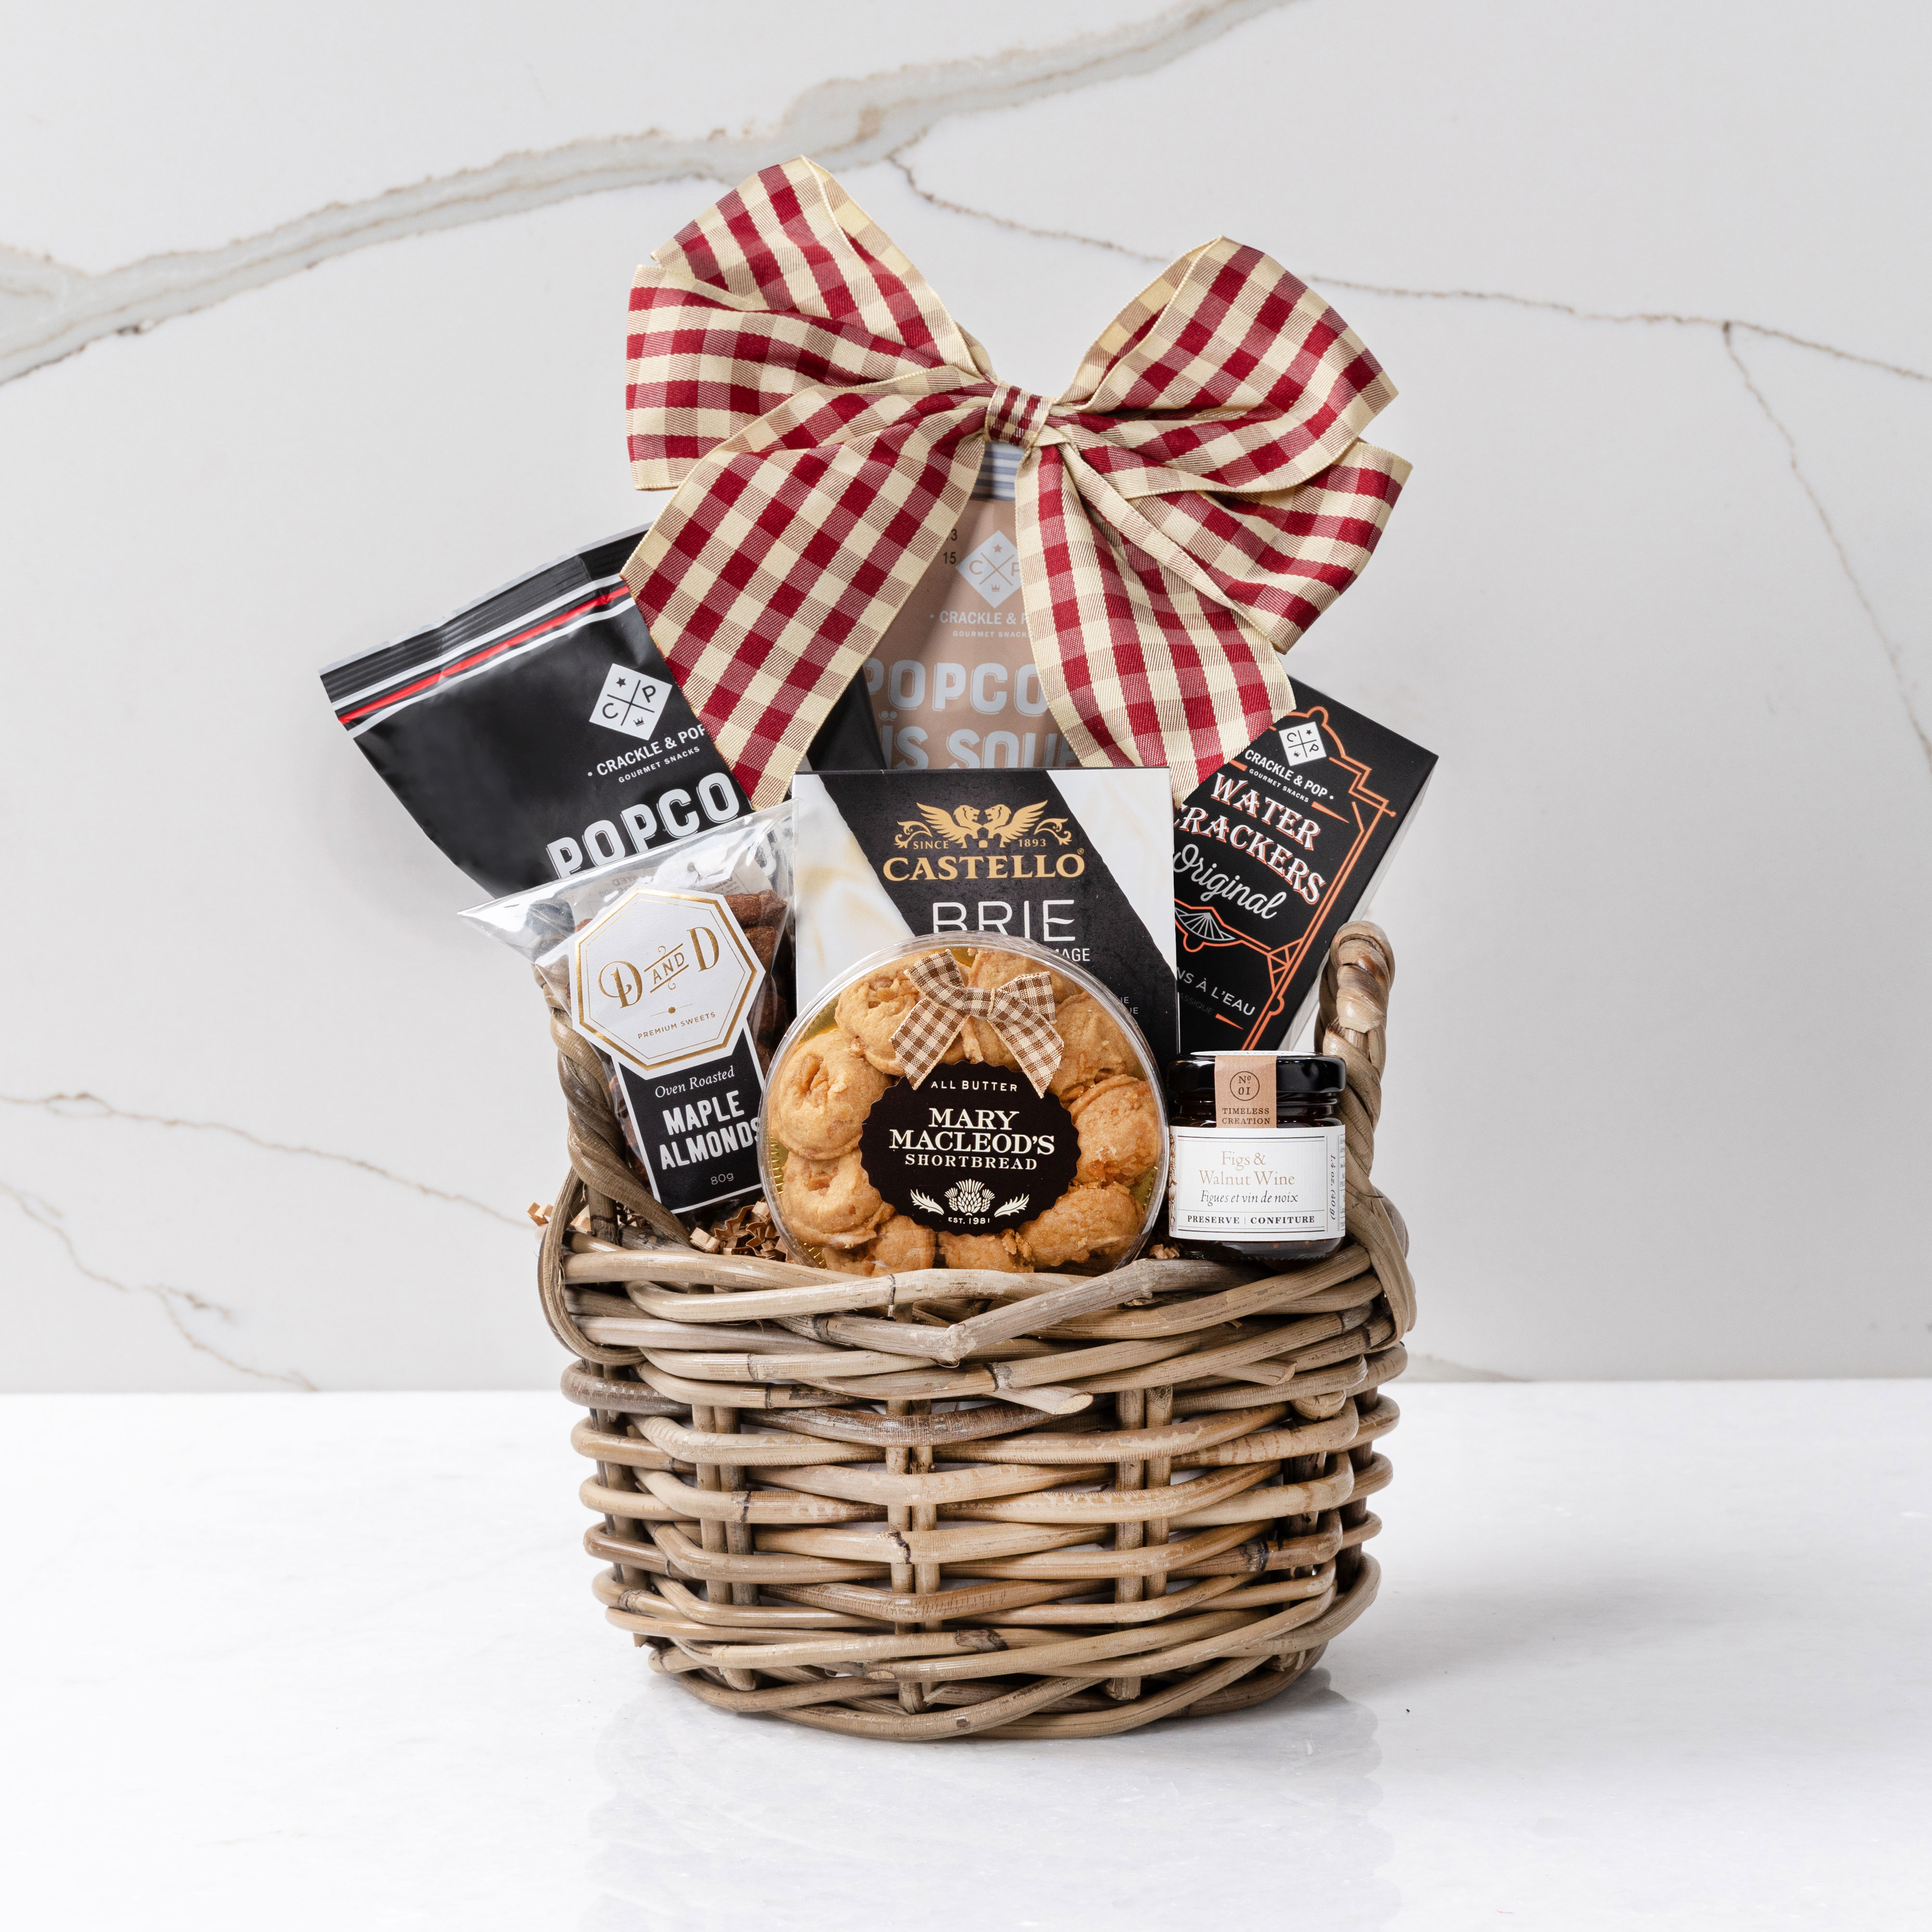 Mother's Day Montreal Gourmet Gift Baskets - Buy Online Today !